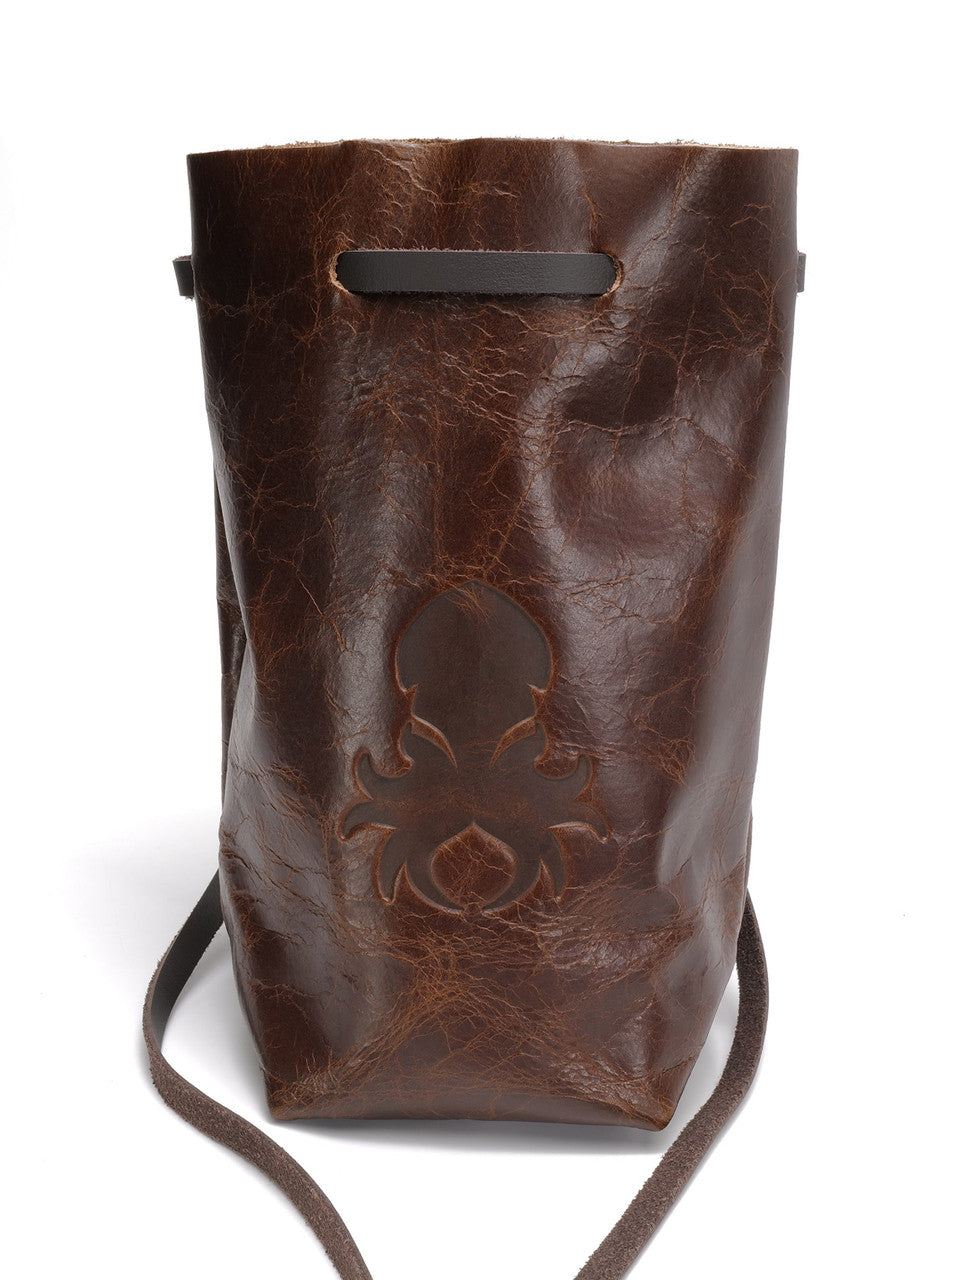 Freestanding Large Dice Bag In Distressed Saddle Brown Leather